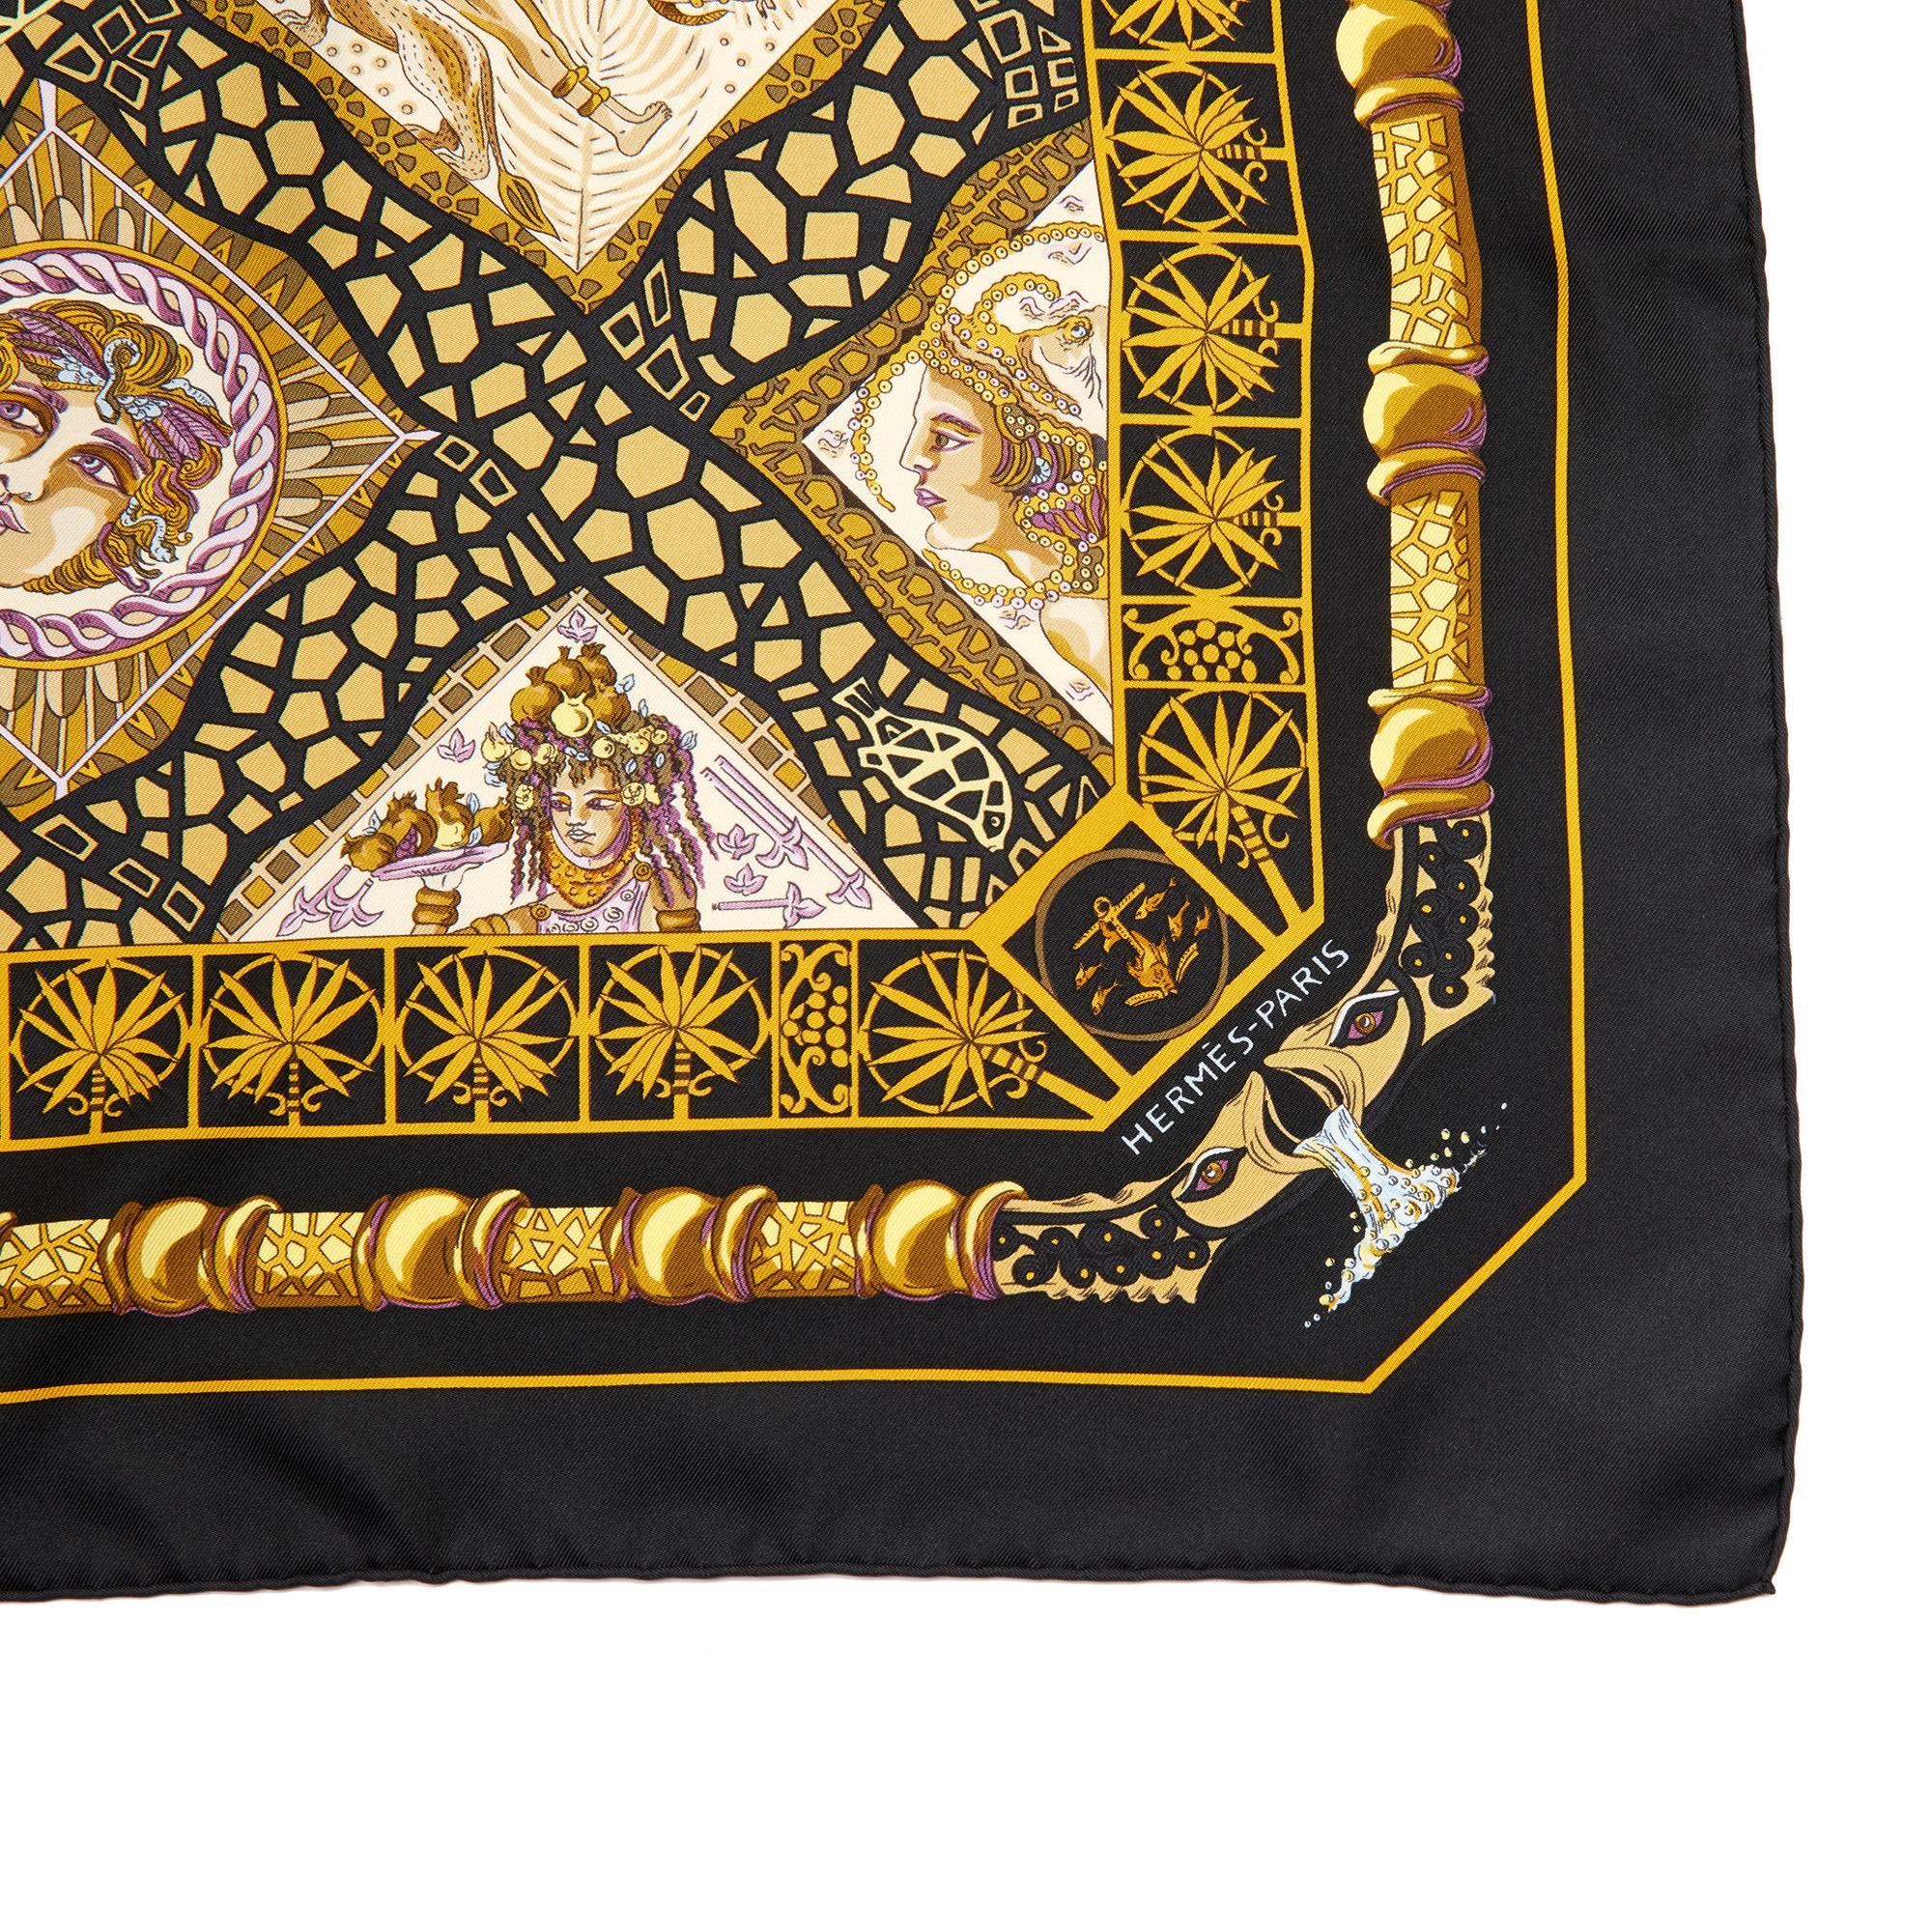 Hermès BLACK & GOLD SILK VINTAGE MARE NOSTRUM SCARF

CONDITION NOTES
The exterior is in exceptional condition with minimal signs of use.
Overall this item is in exceptional pre-owned condition. Please note the majority of the items we sell are